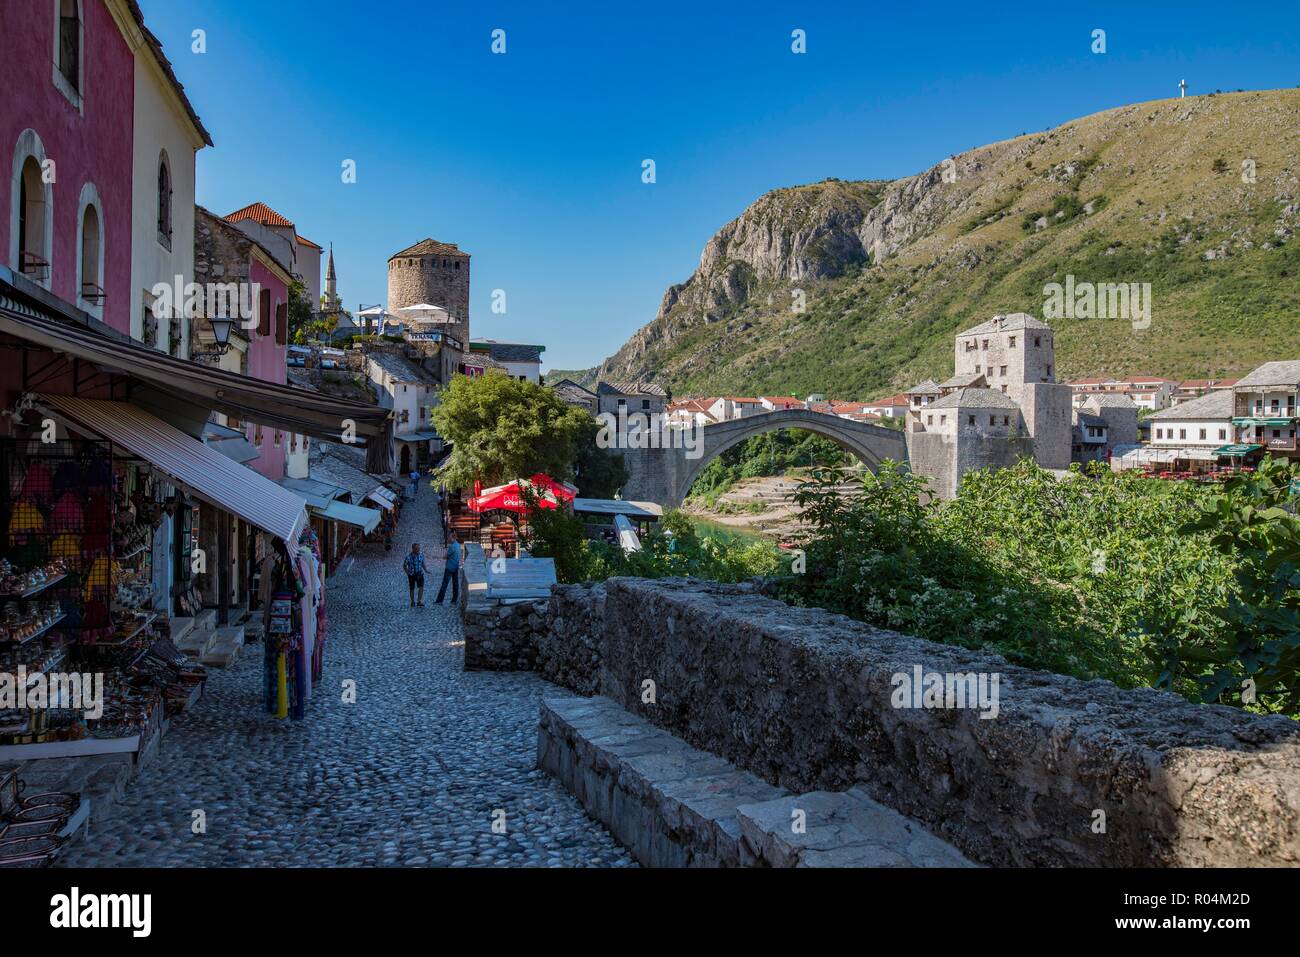 BOSNIA-HERZEGOVINA. Beautifullly renovated houses and snmall souvenirshops in the historic center around the rebuilt bridge, UNESCO World Heritage Stock Photo